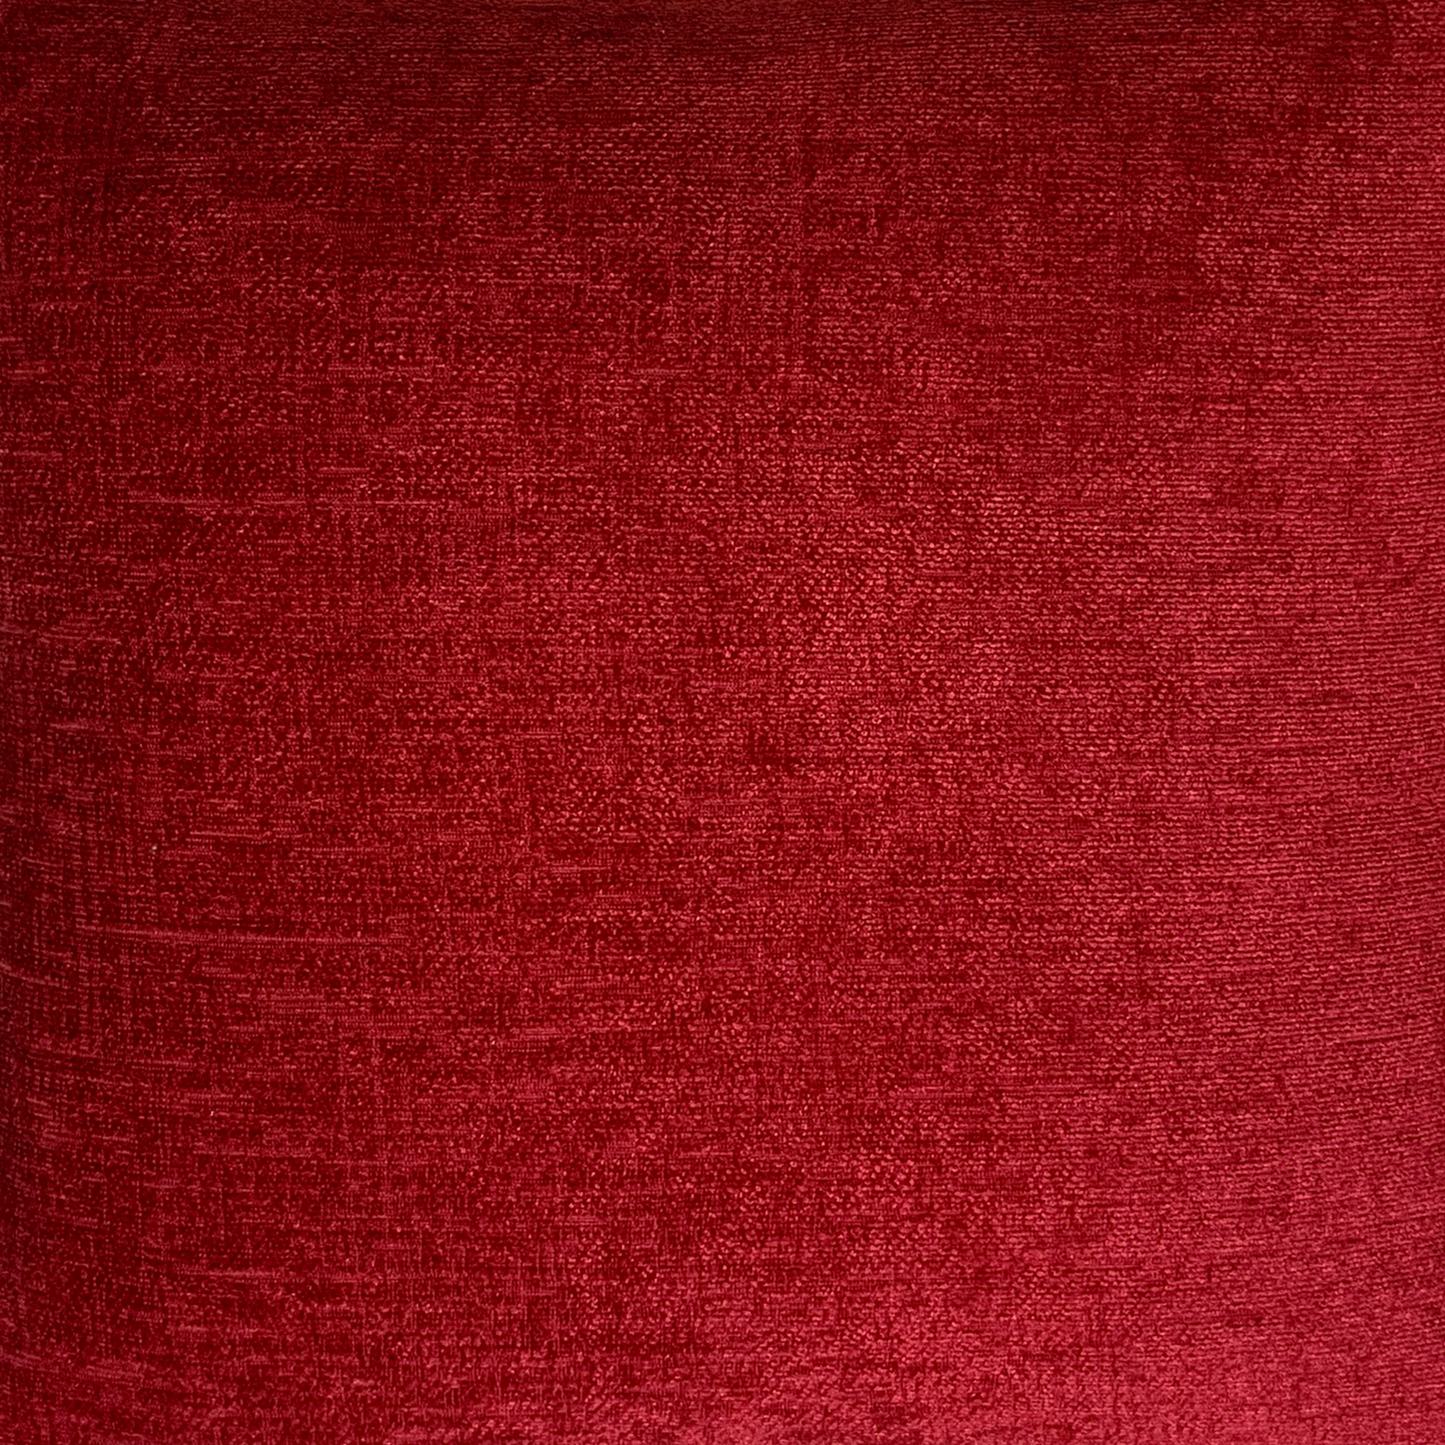 Elite Chenille Upholstery Fabric Shimmering Cushion Throw Craft Decor FR BS7177